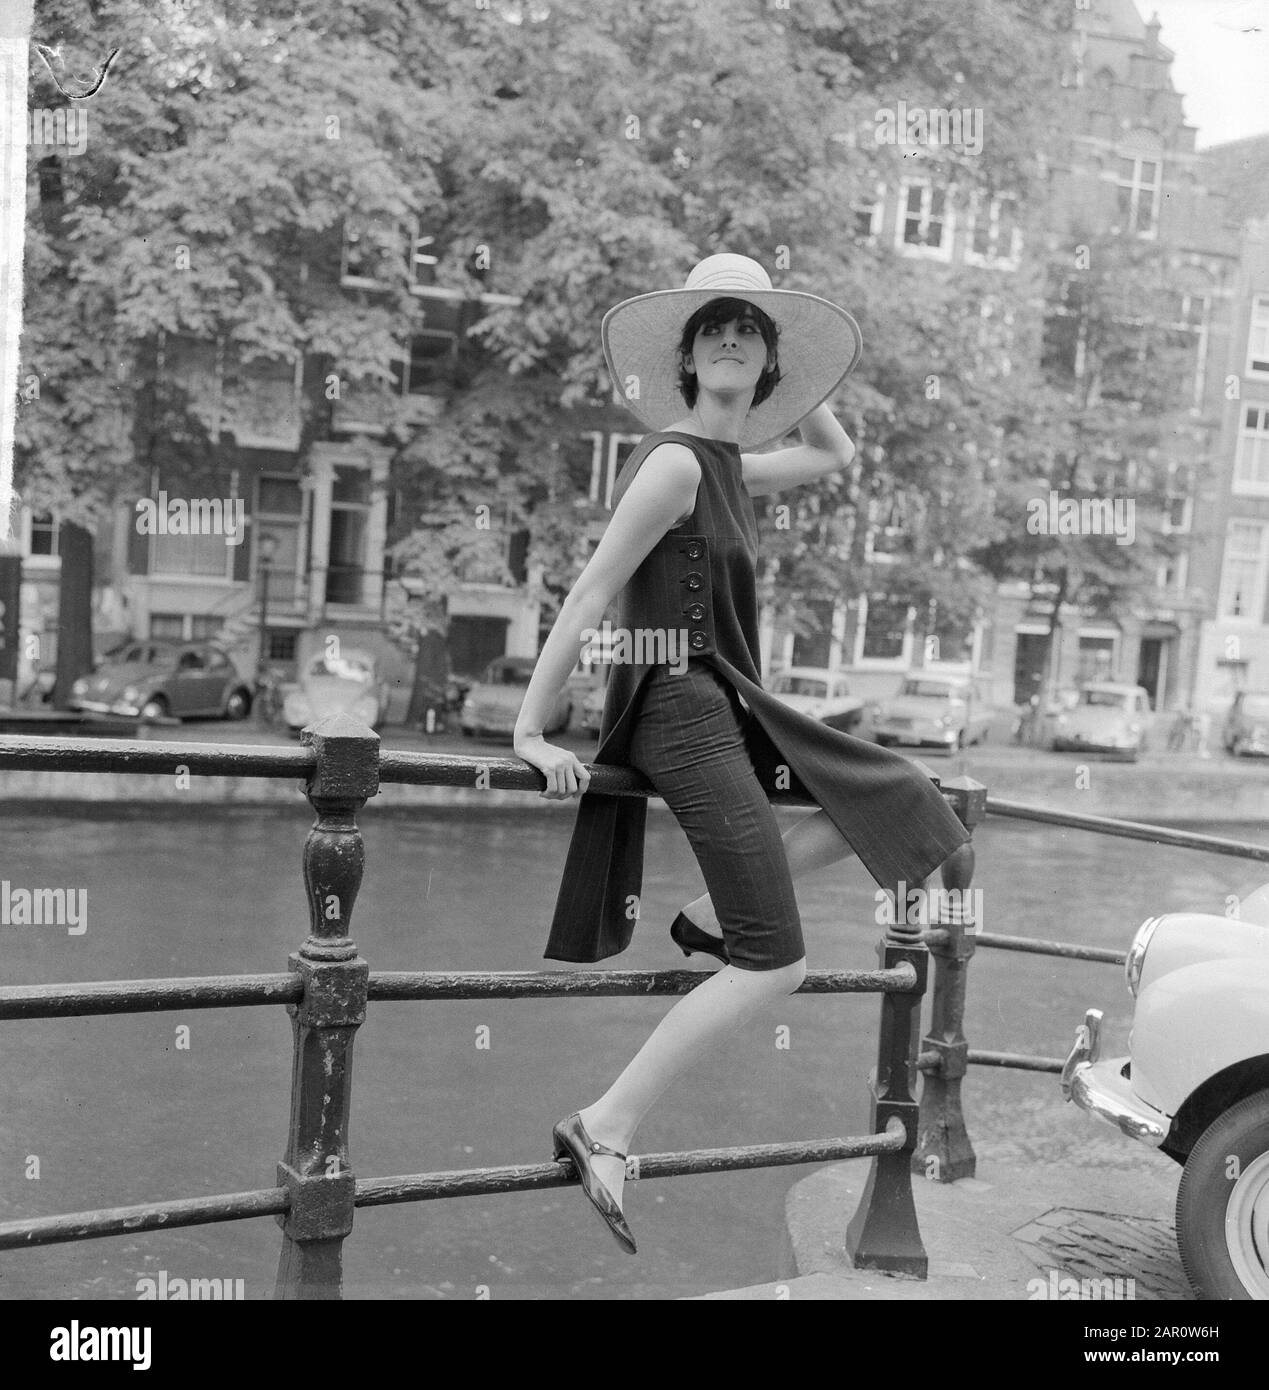 Pour Voyage kamgarenkostuum of navy blue, knickers and rug Date: 24 July  1964 Location: Amsterdam, Noord-Holland Keywords: bridges, canals, fashion,  city images Personal name: Leeger, Josje Stock Photo - Alamy